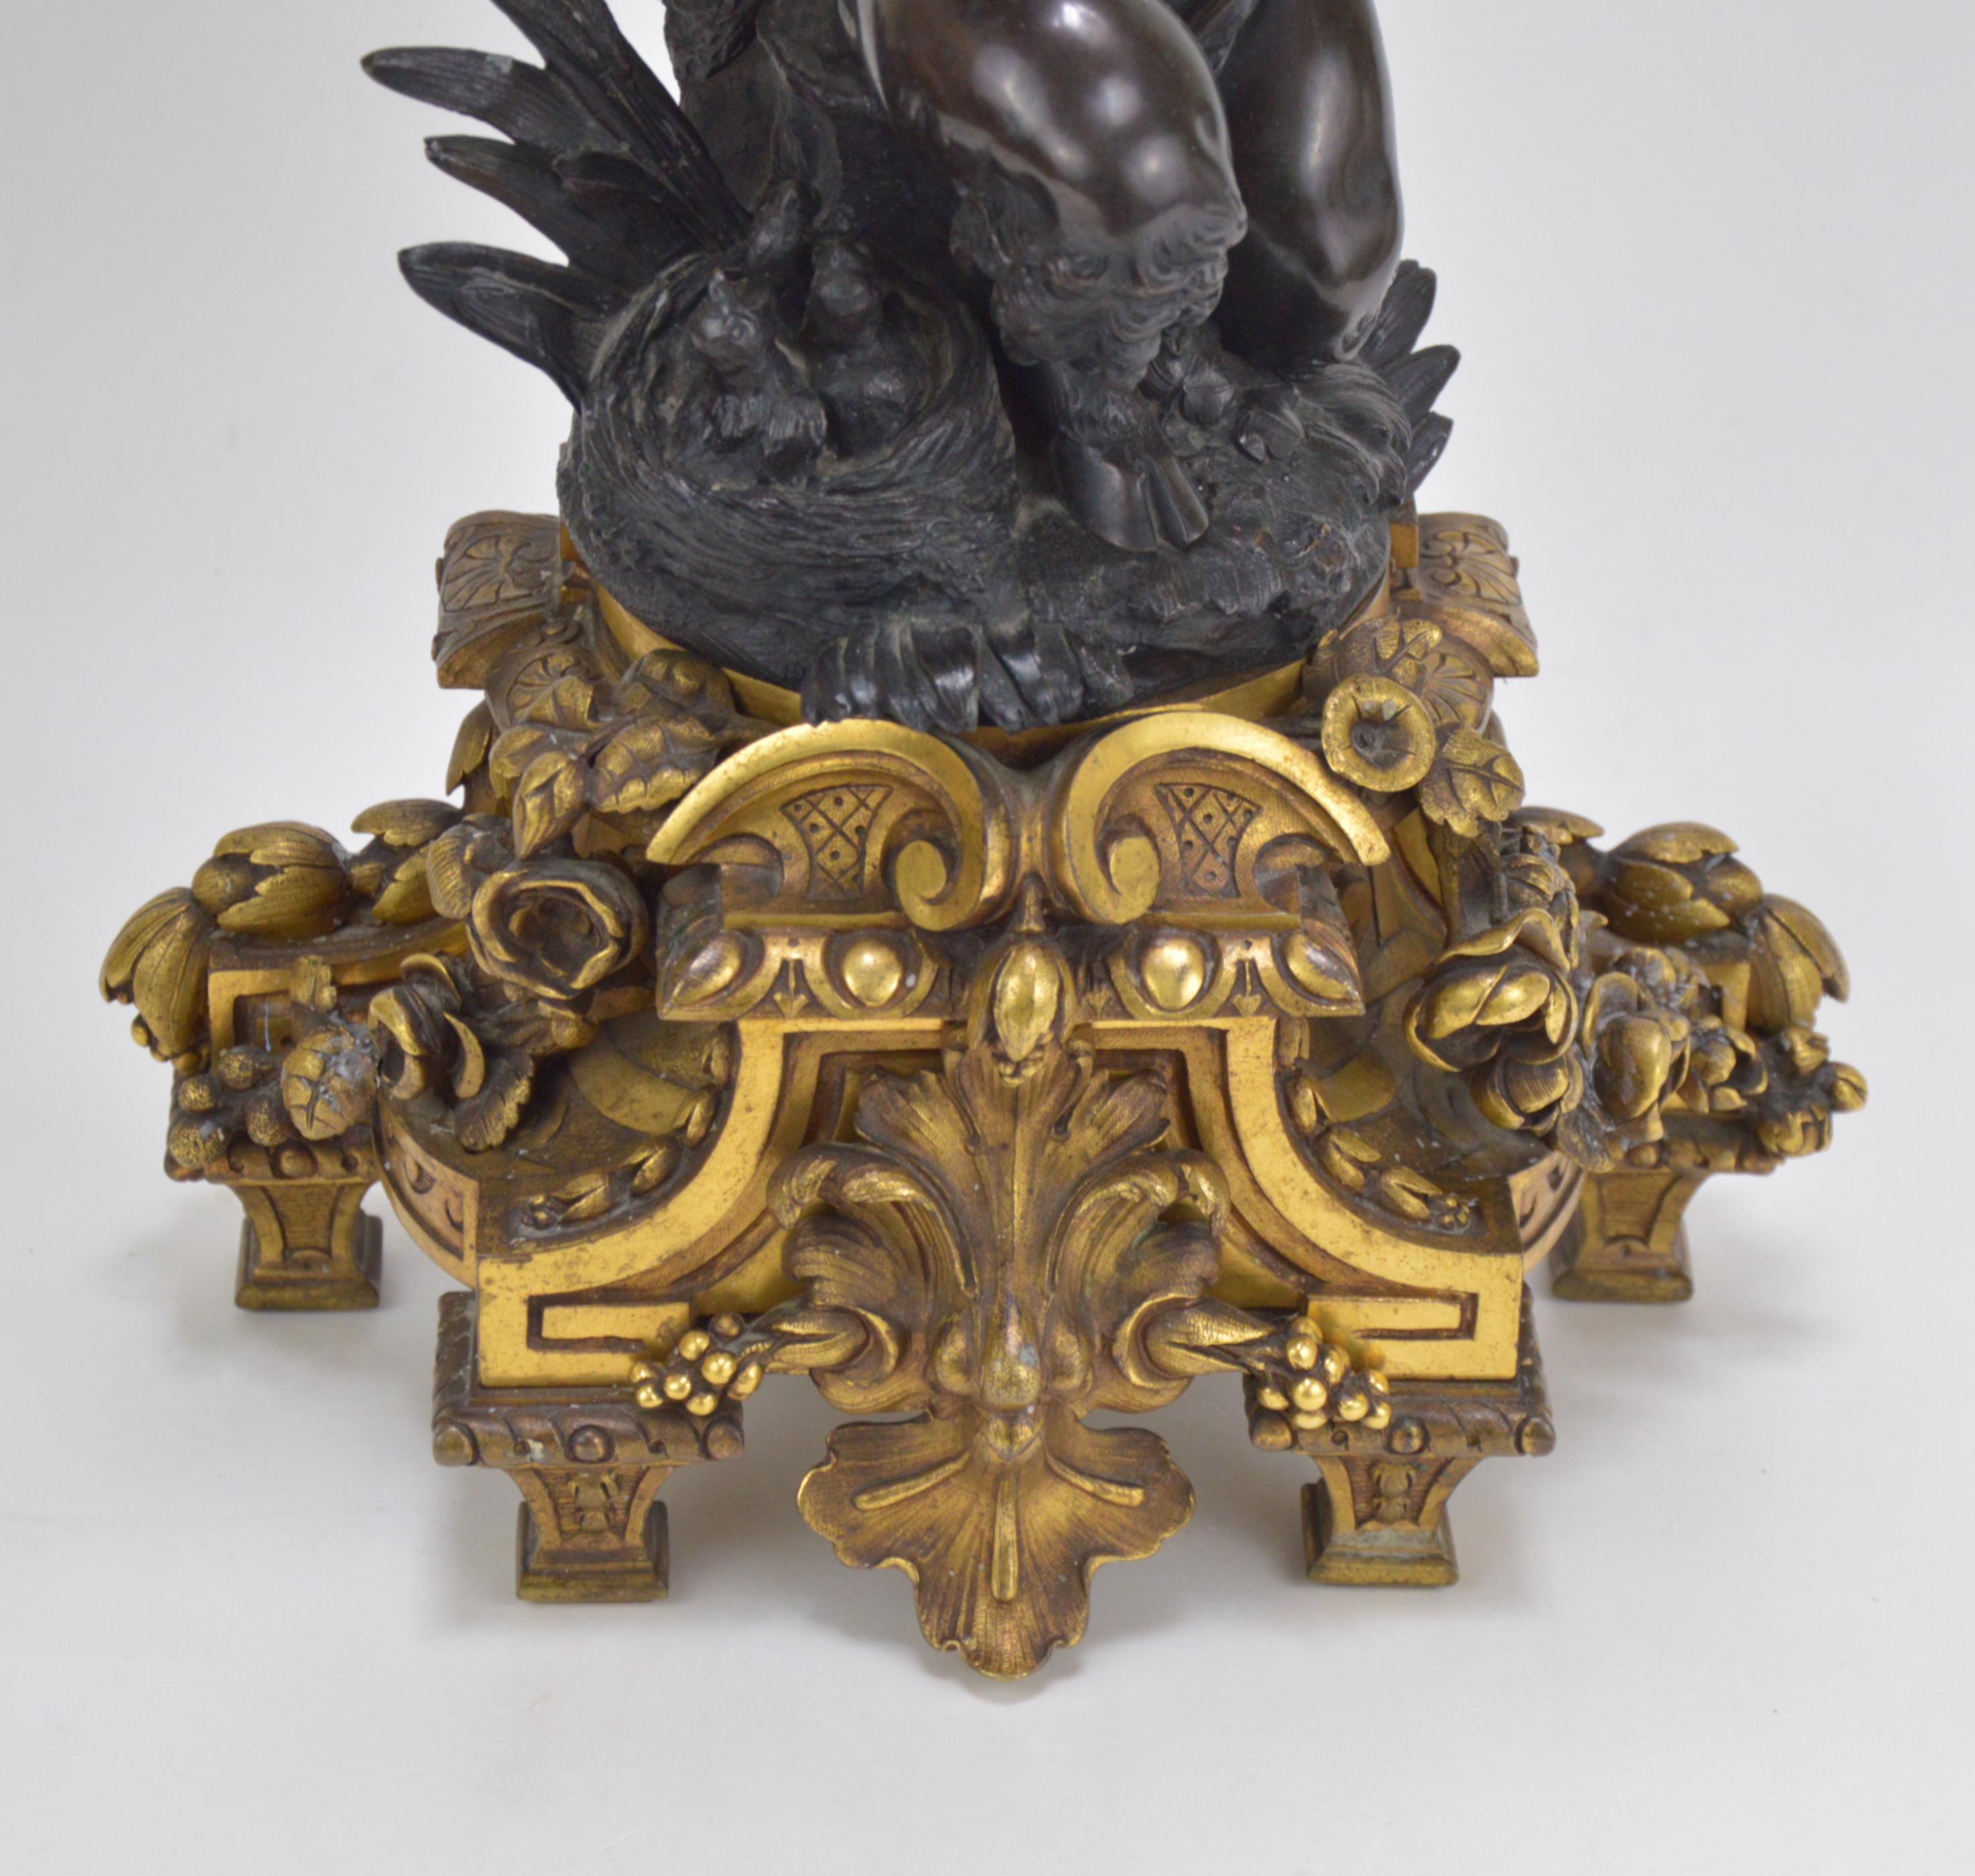 Pair of bronze candelabra representing fauns in patinated bronze holding a small owl and a baby bird. Napoleon III style decoration, mid-19th century.
Measures: Height 83 cm.